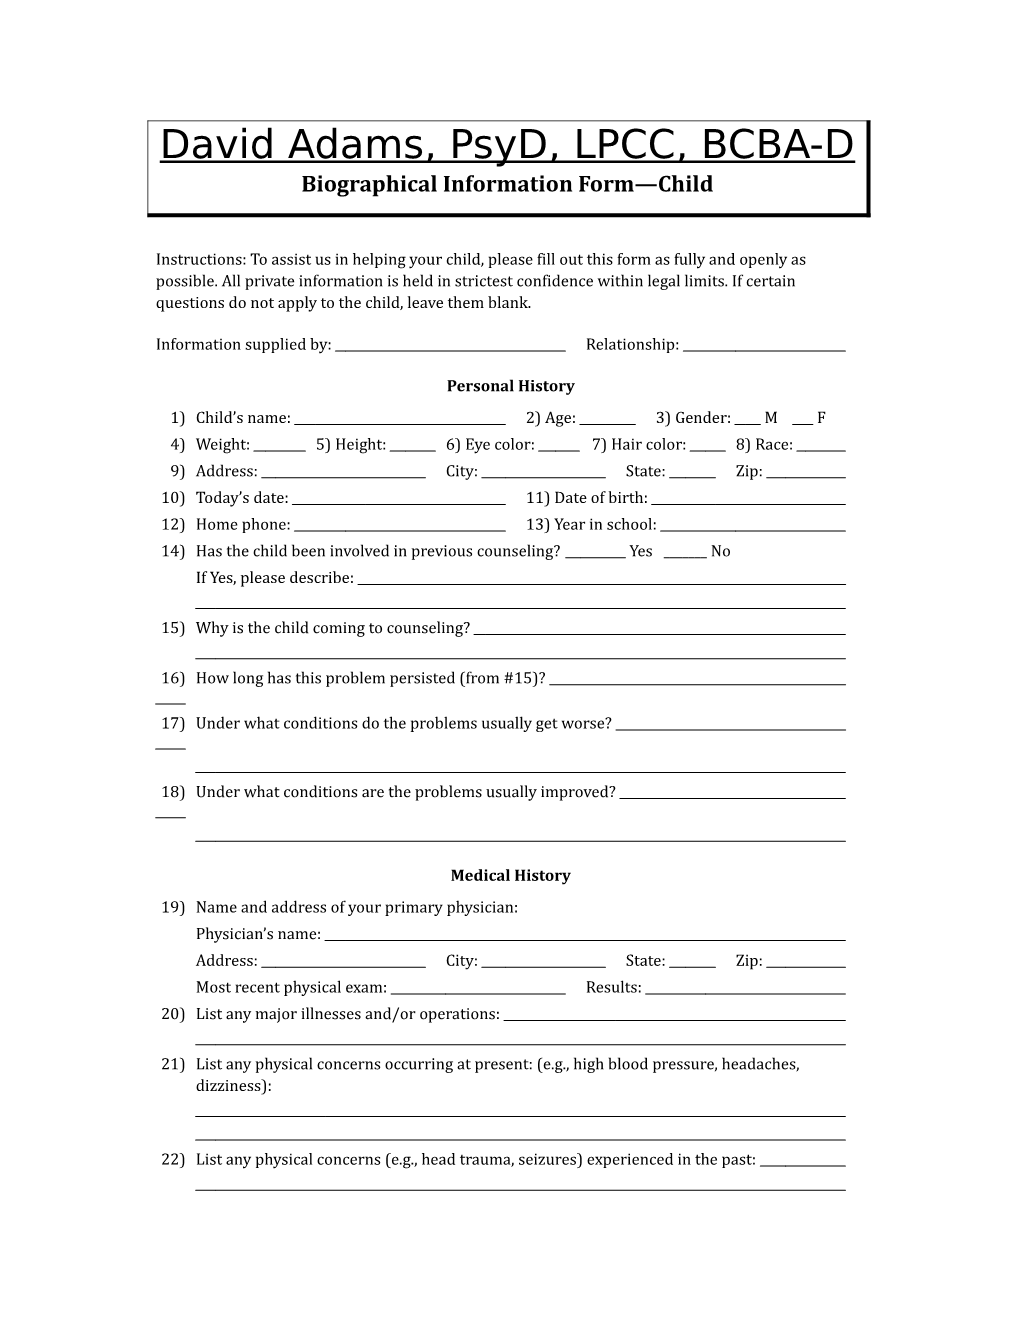 Biographical Information Form Child